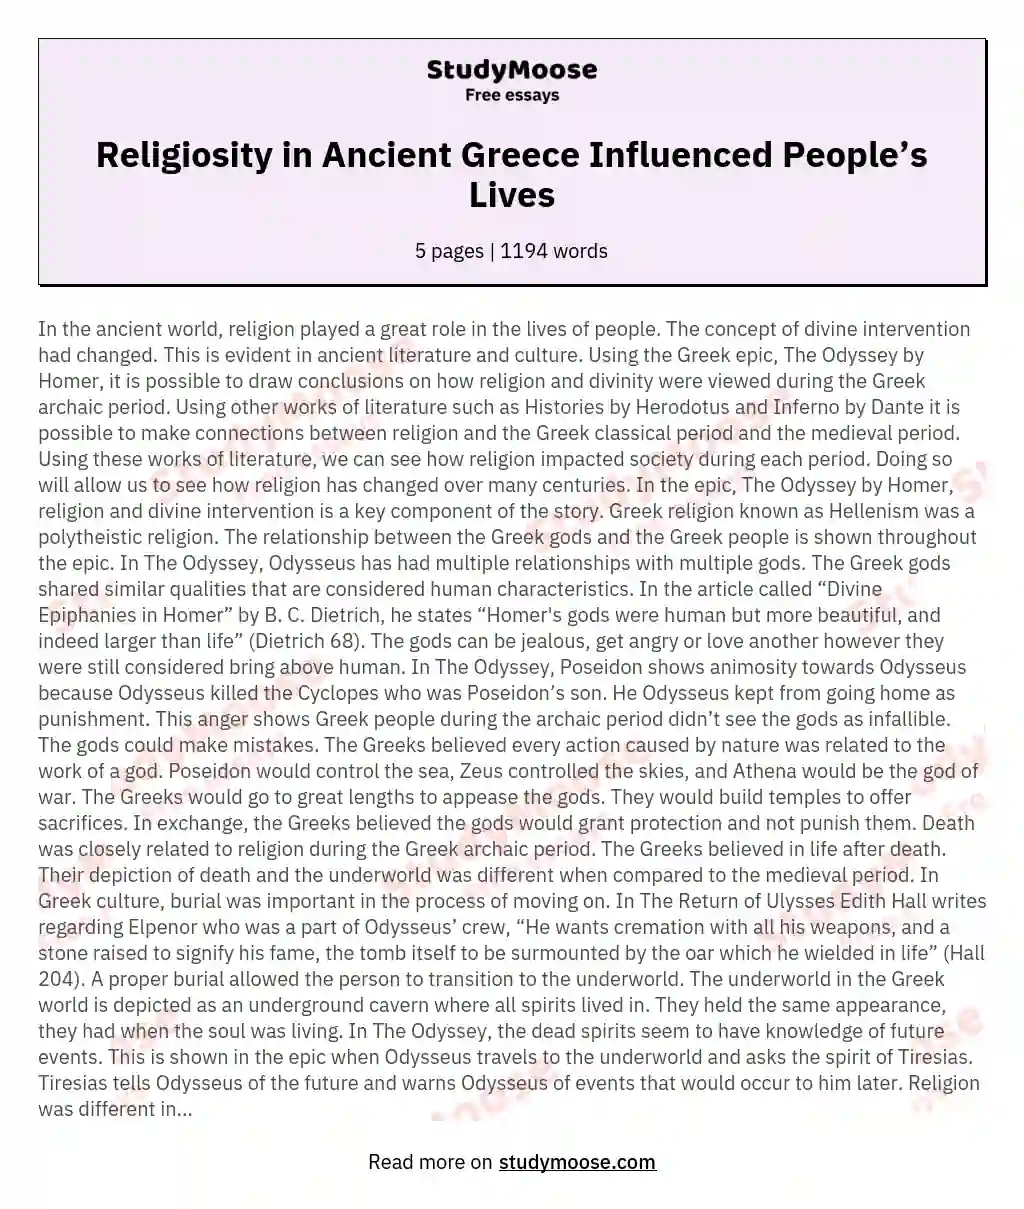 Religiosity in Ancient Greece Influenced People’s Lives essay